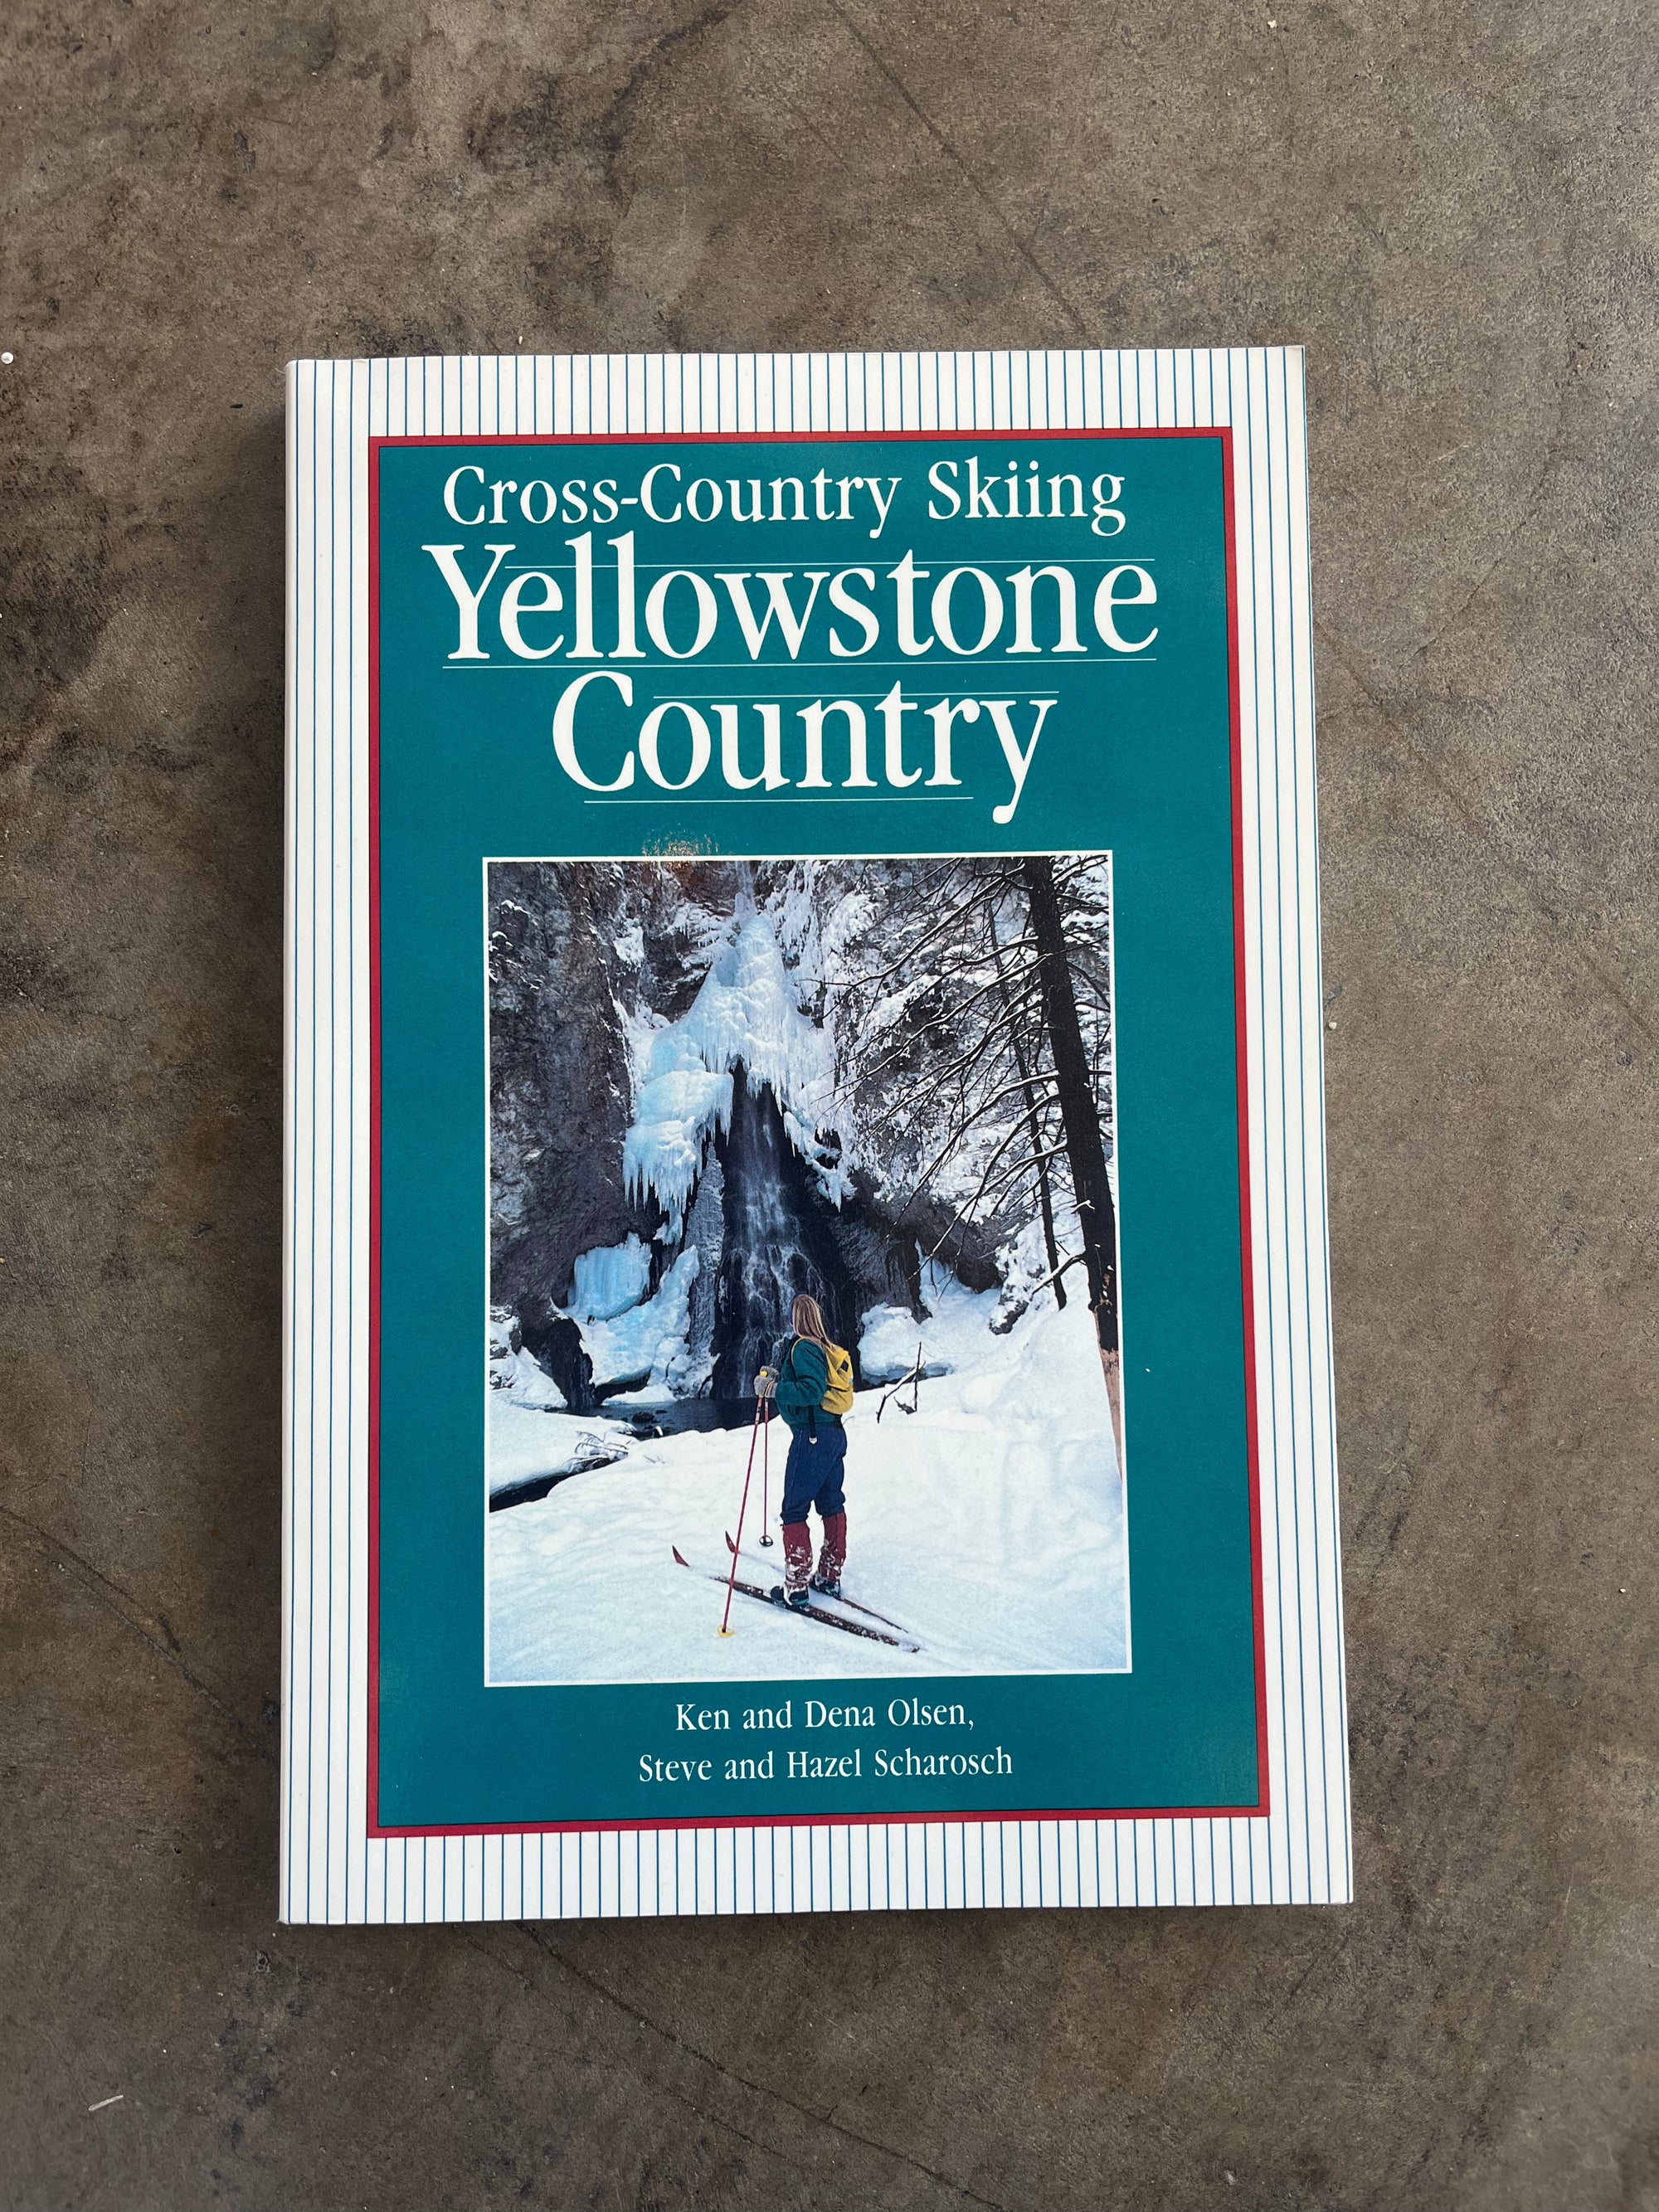 "Cross-Country Skiing Yellowstone Country" Book